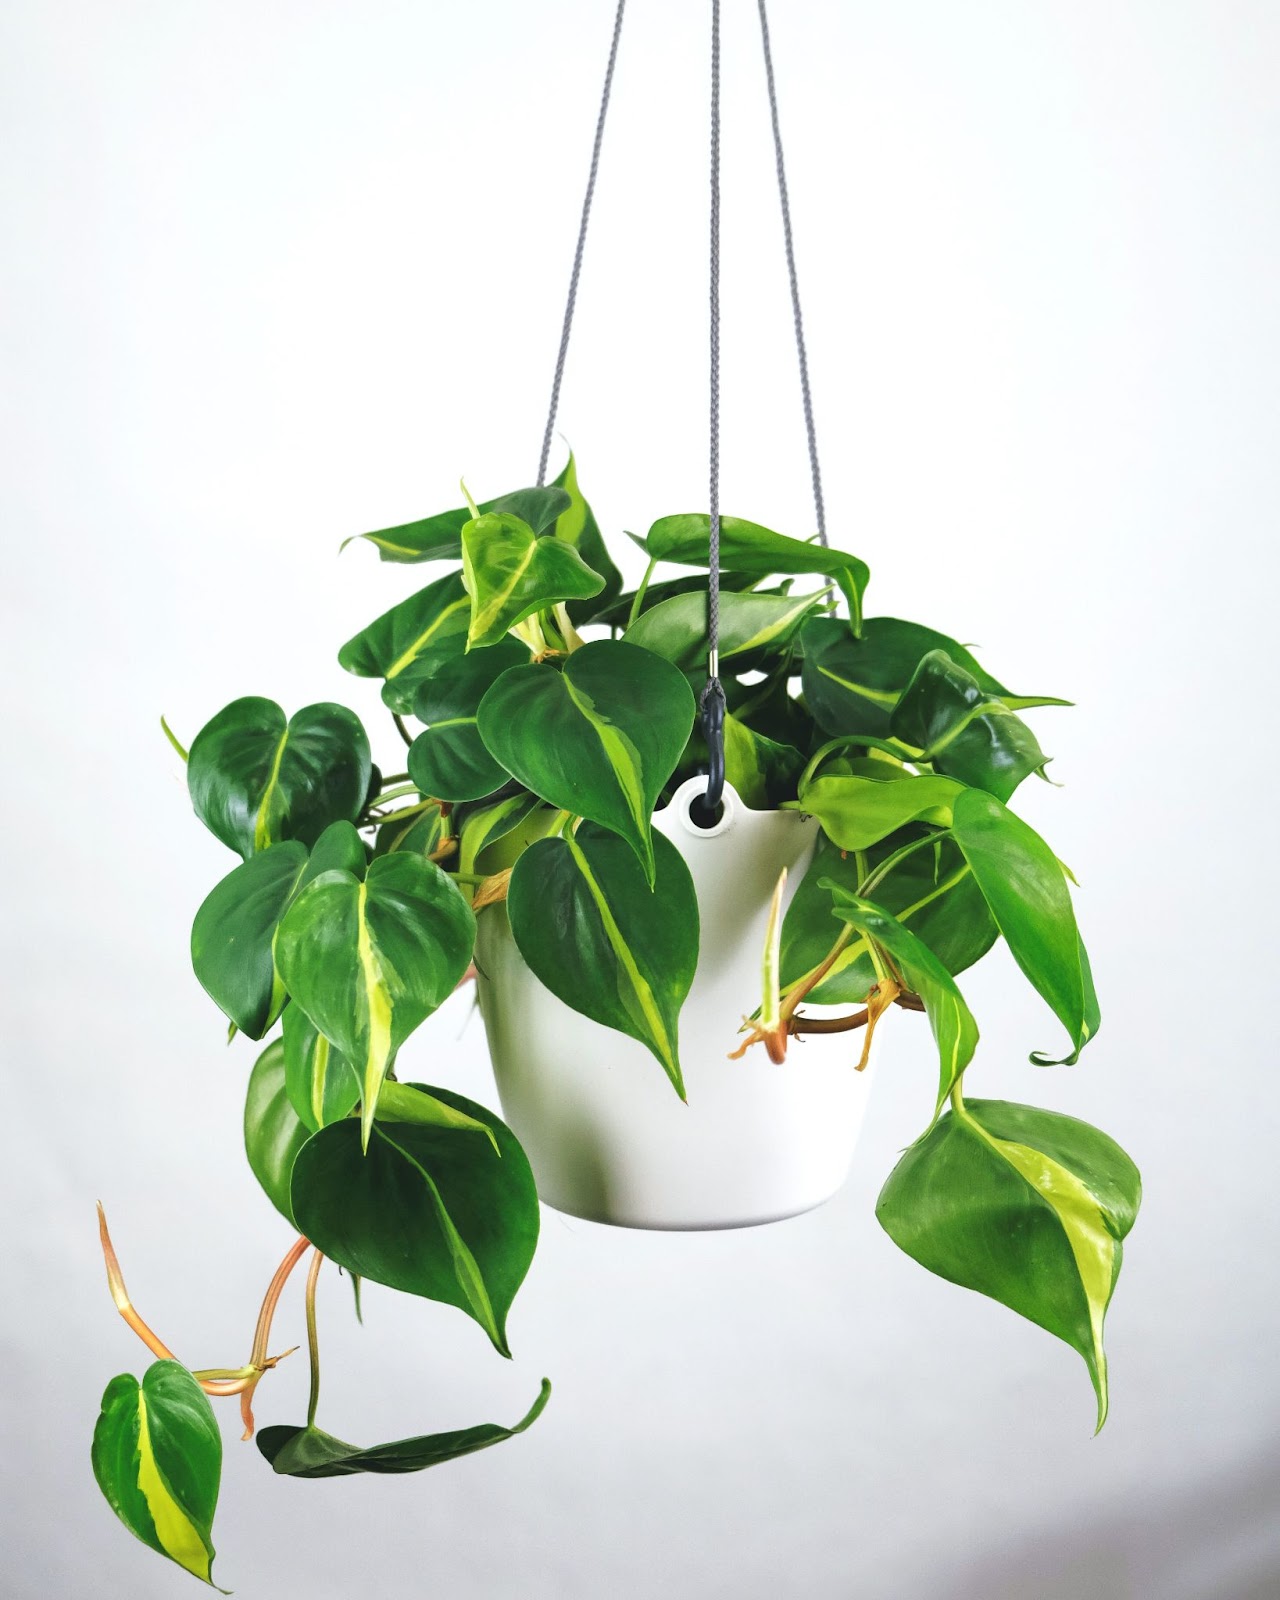 Heart-Leaf Philodendron in a hanging basket. 